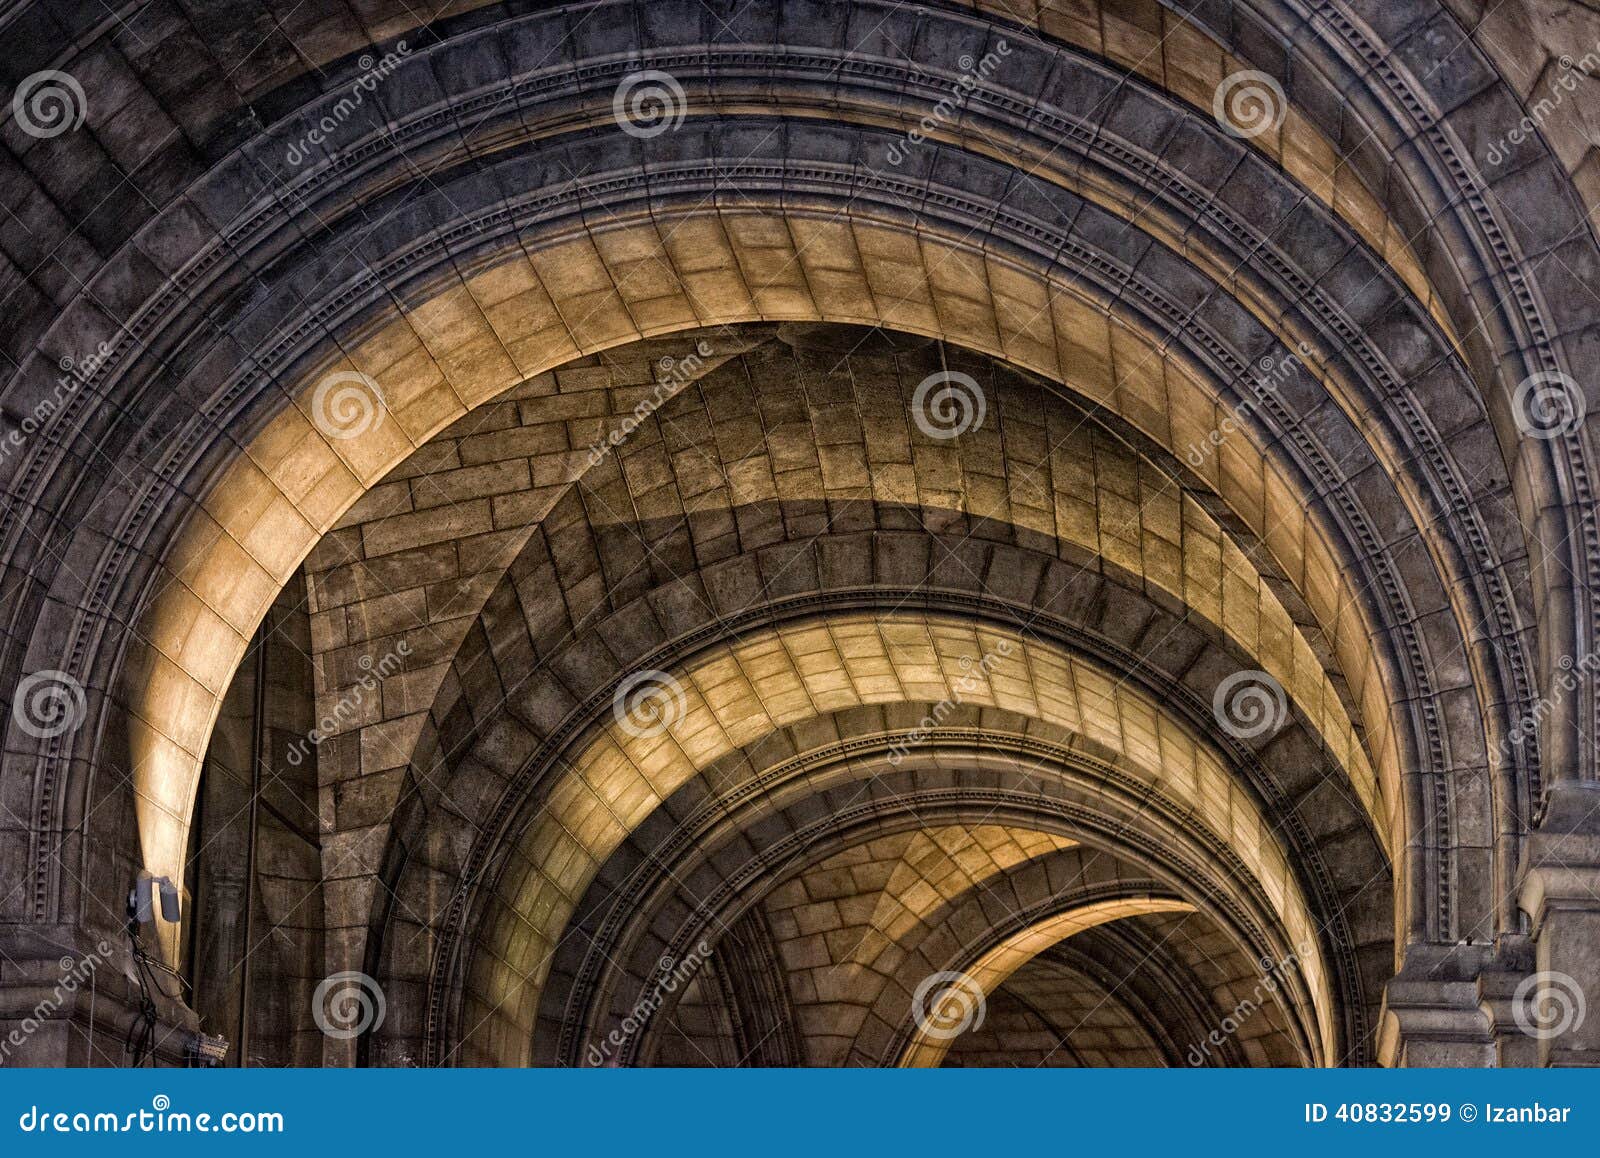 Medieval Church Stone Arches Stock Image Image Of